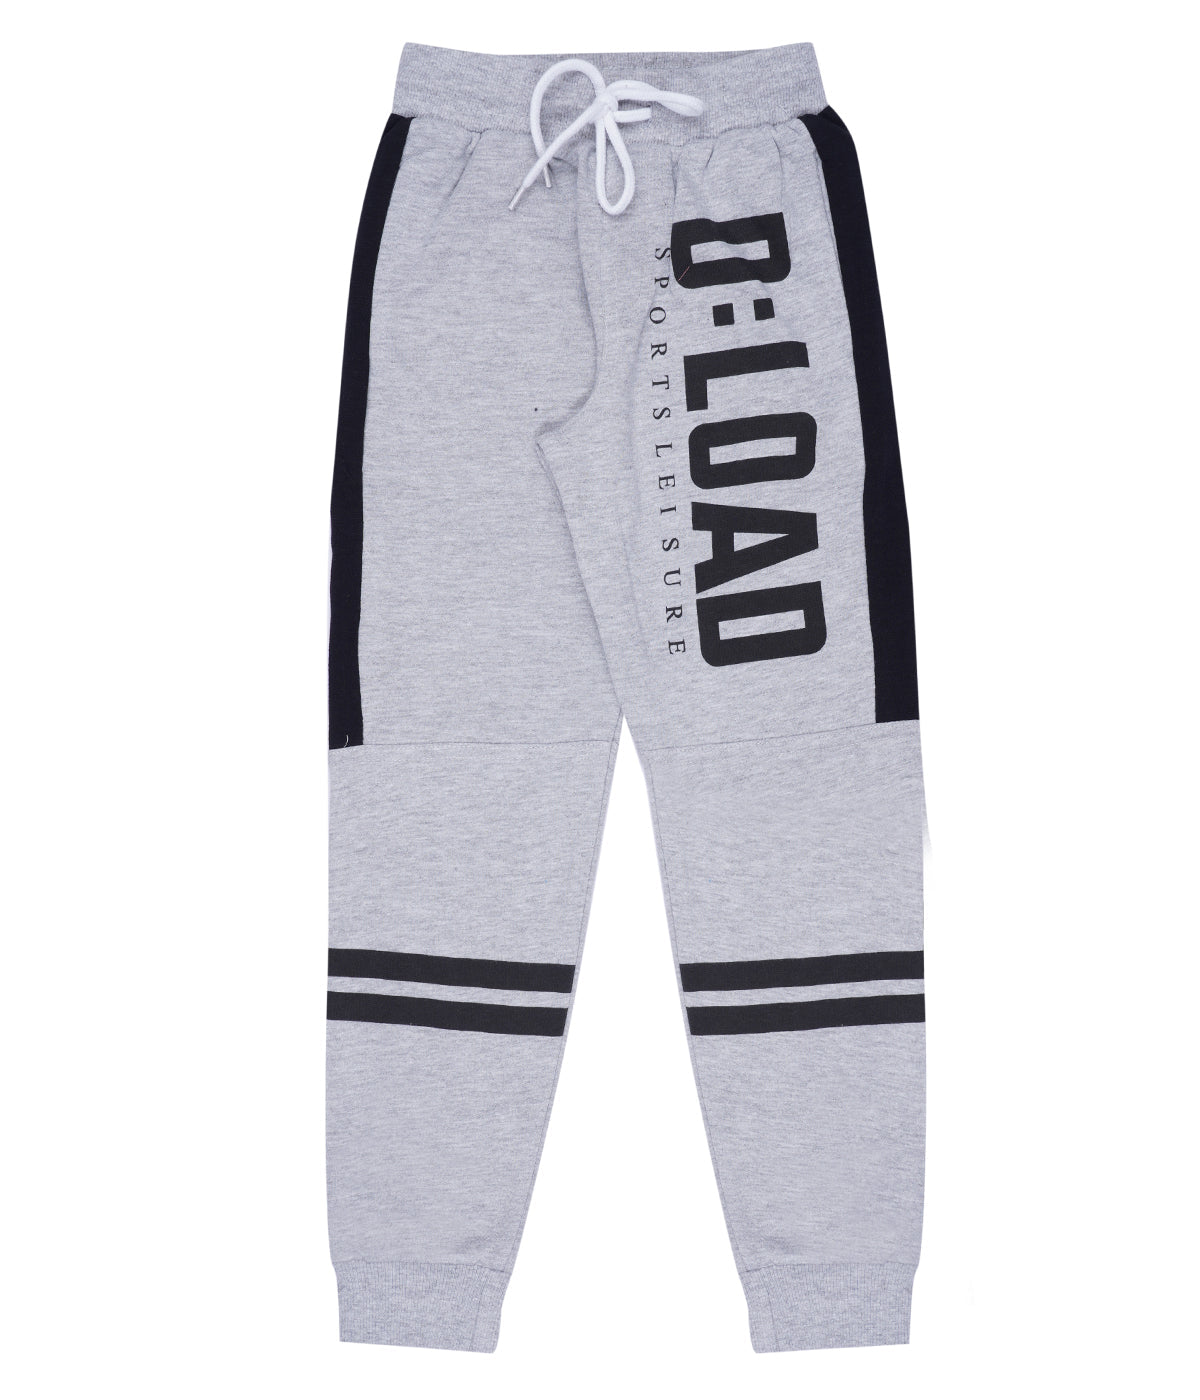 Yalzz Track Pant For Boys Grey Pack of 1